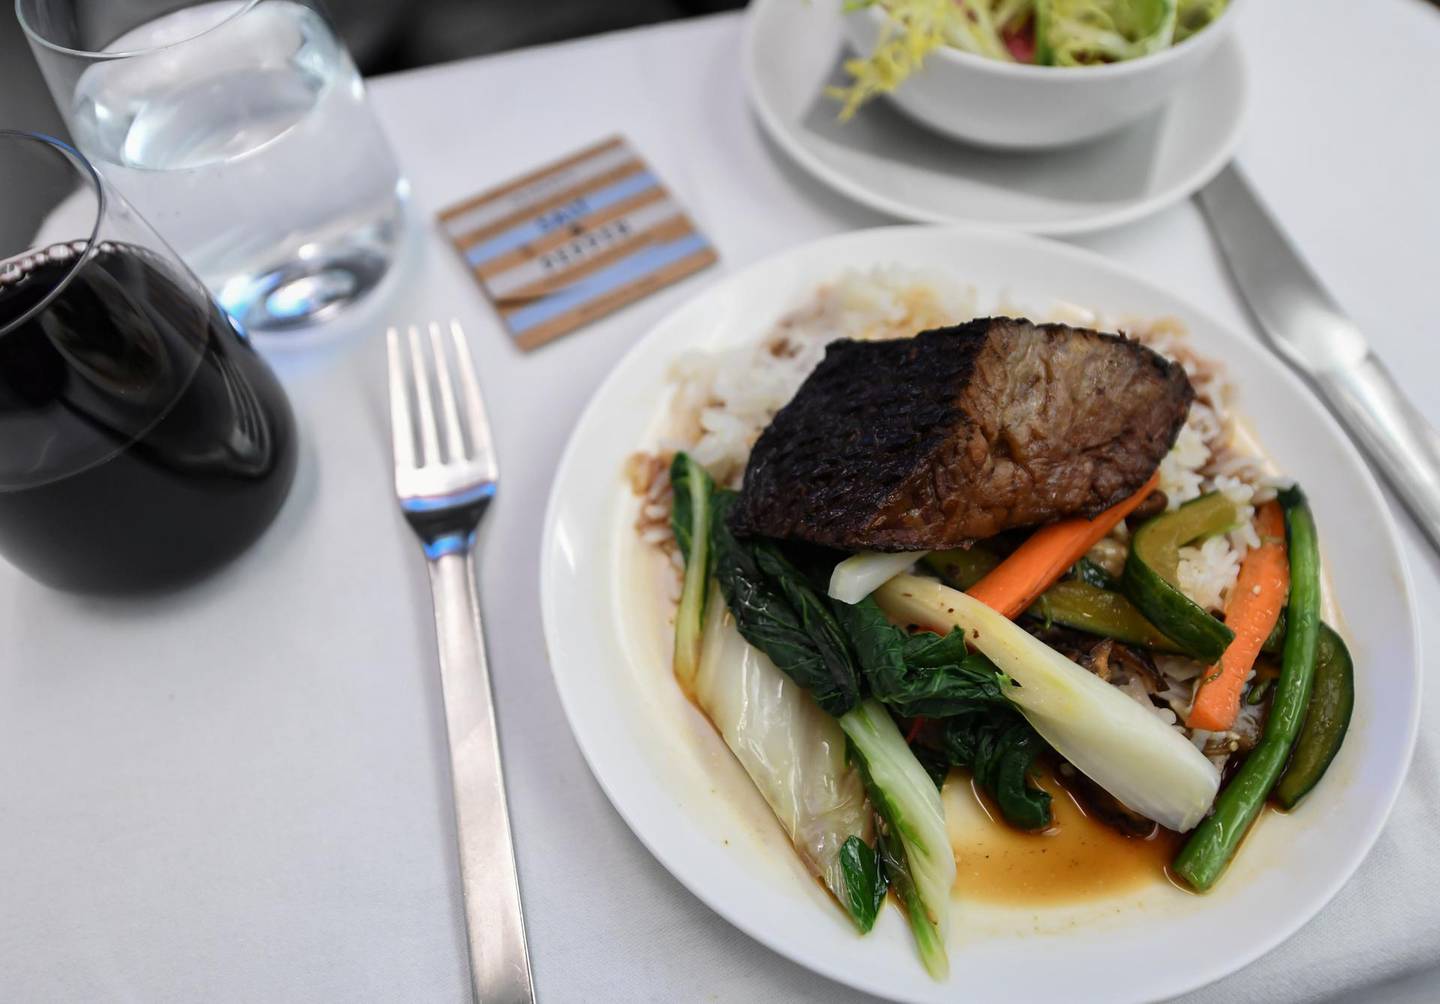 Passengers on the world's longest commercial flight by distance will eat supper at breakfast time. Courtesy Qantas/James D Morgan